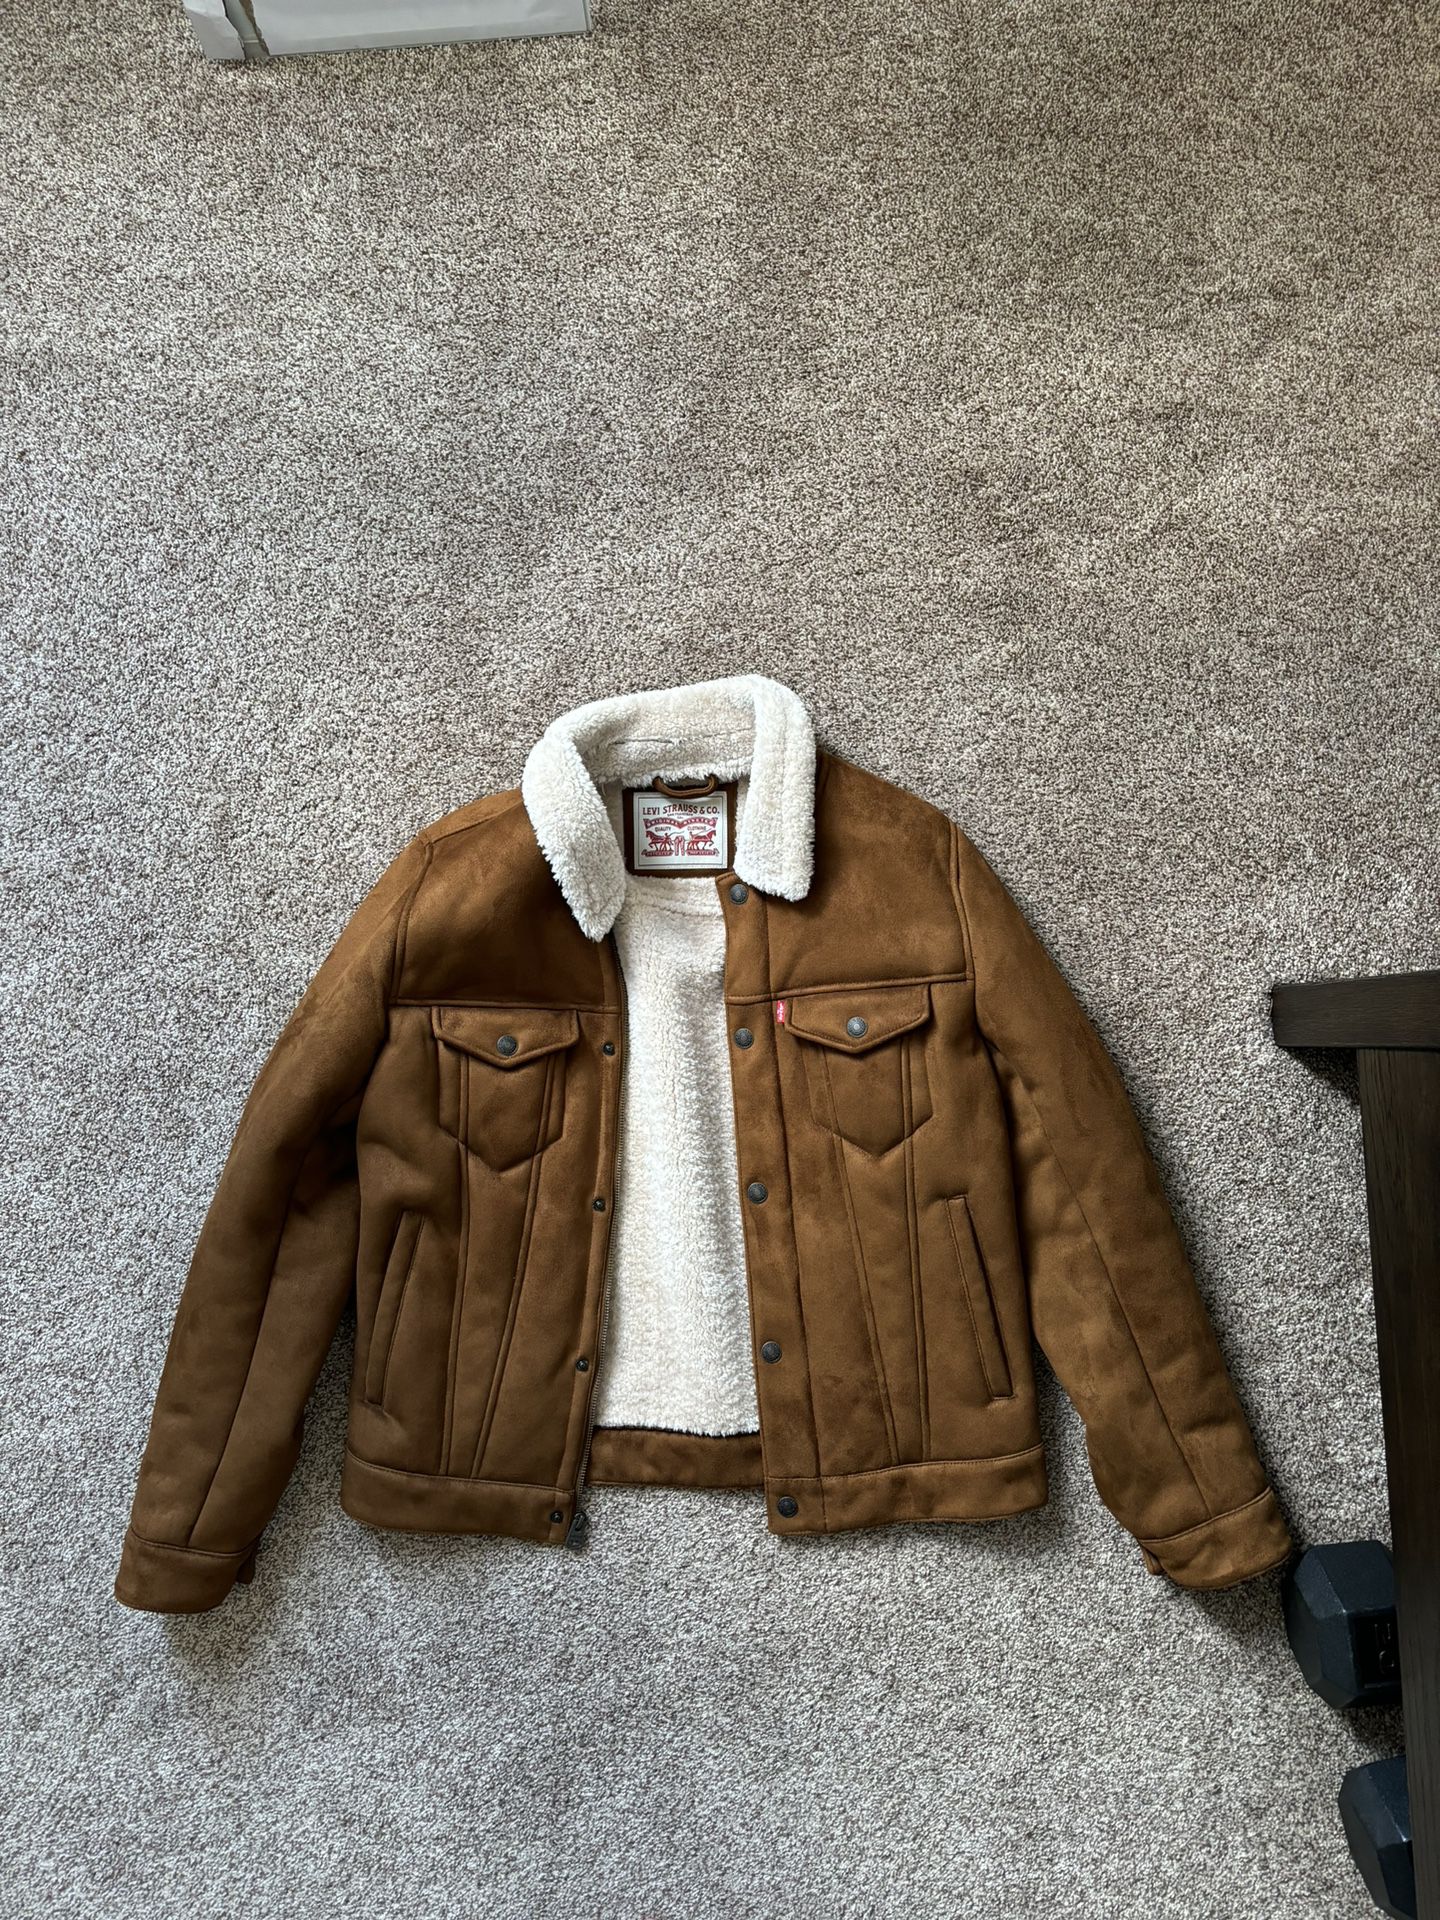 LEVIS BROWN SMALL JACKET